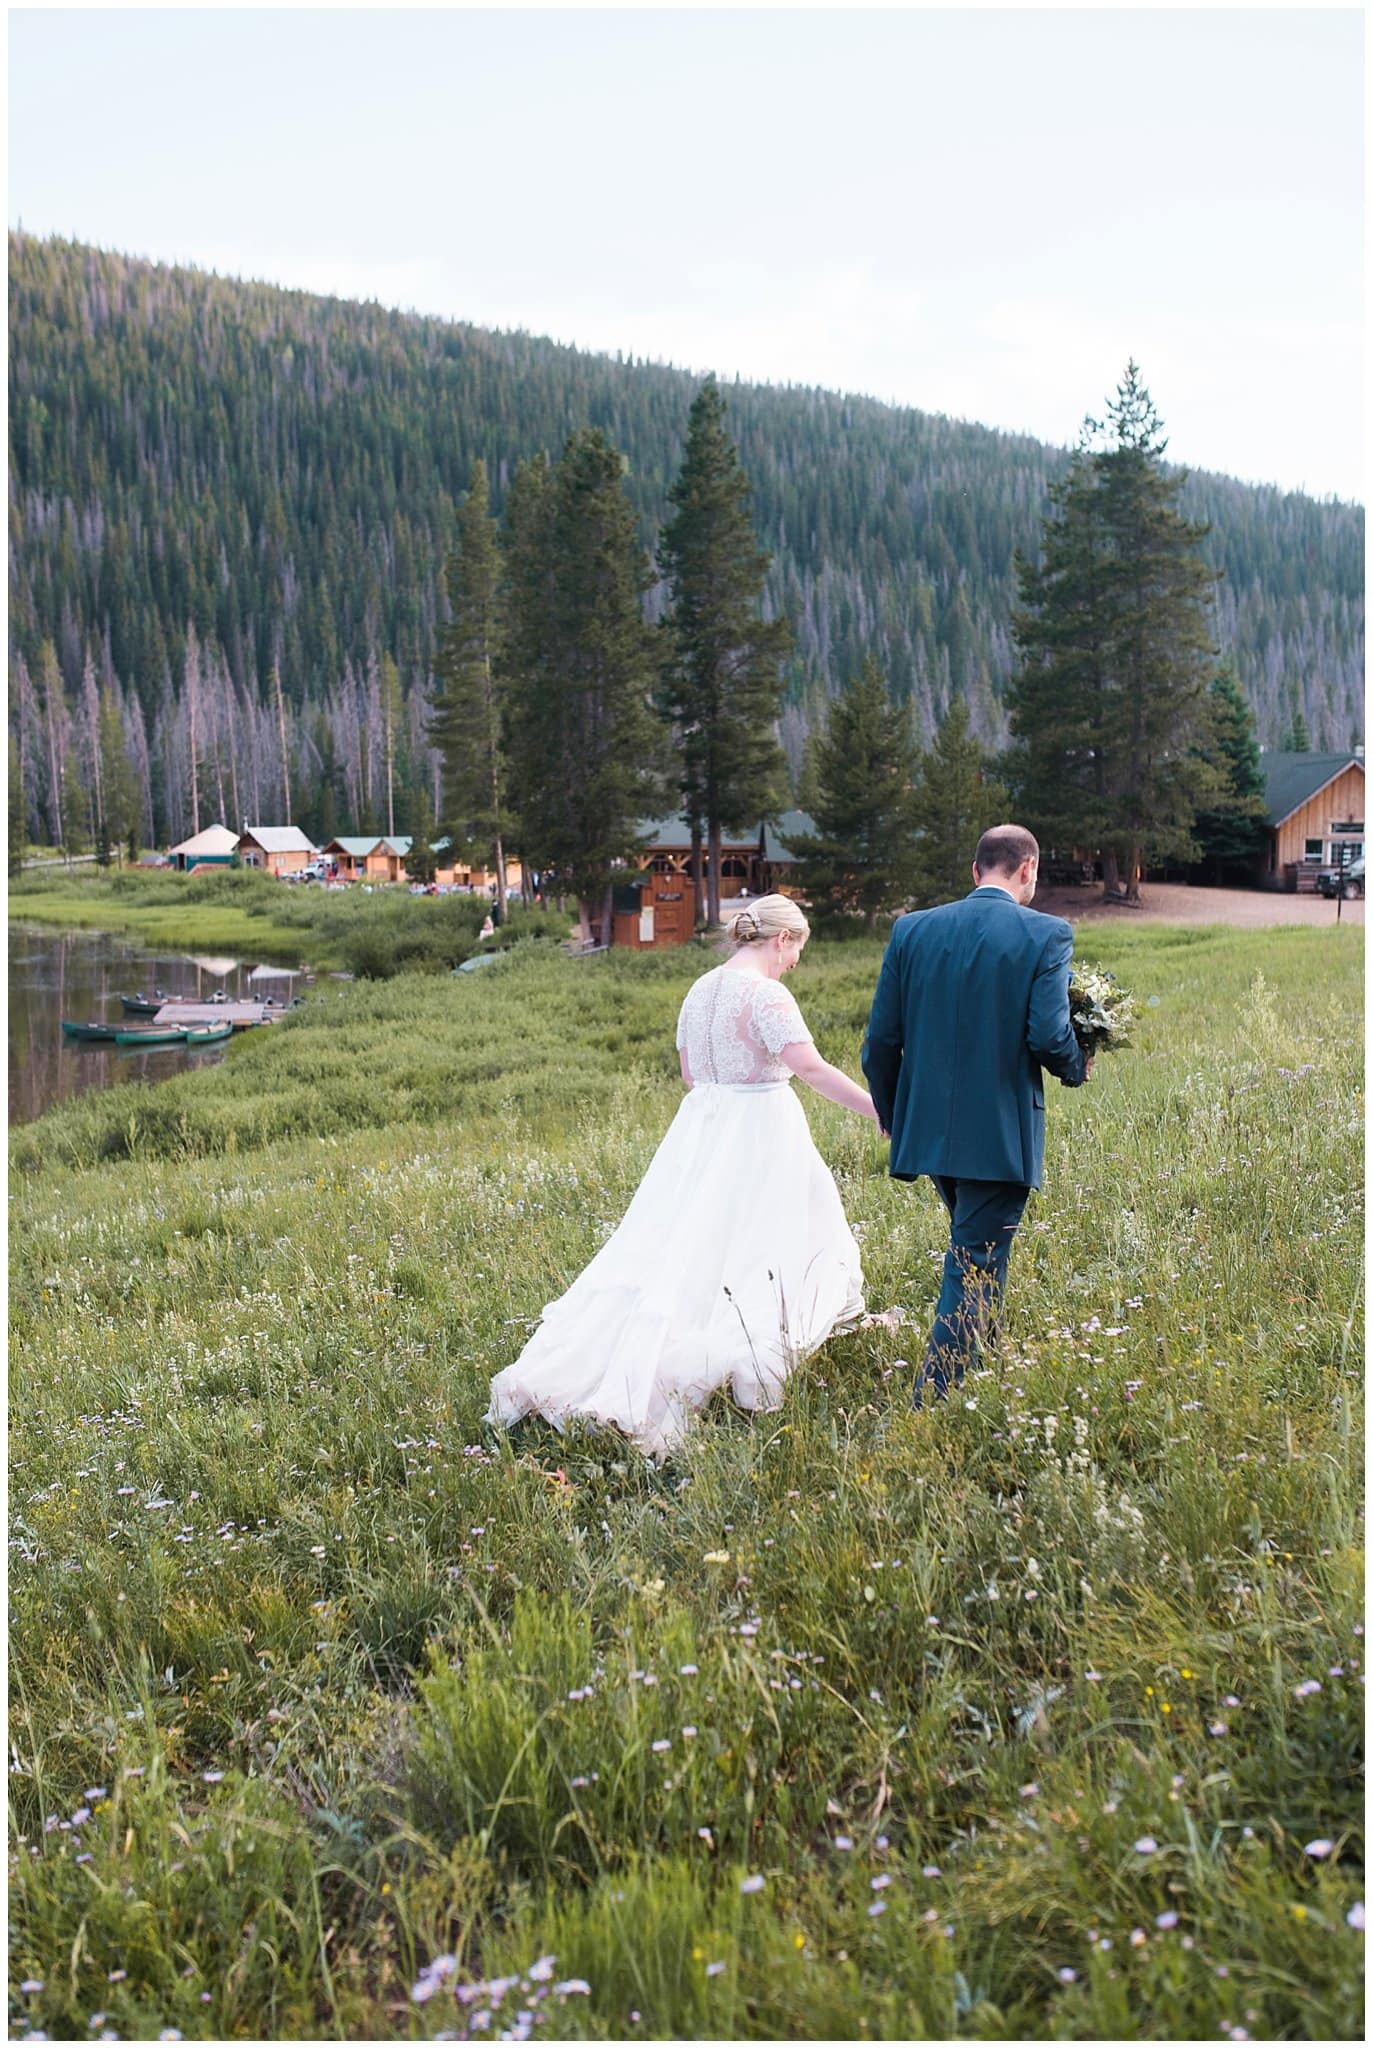 groom holding brides hand as they walk back to reception at sunset at Piney River Ranch wedding by Vail wedding photographer Jennie Crate photographer